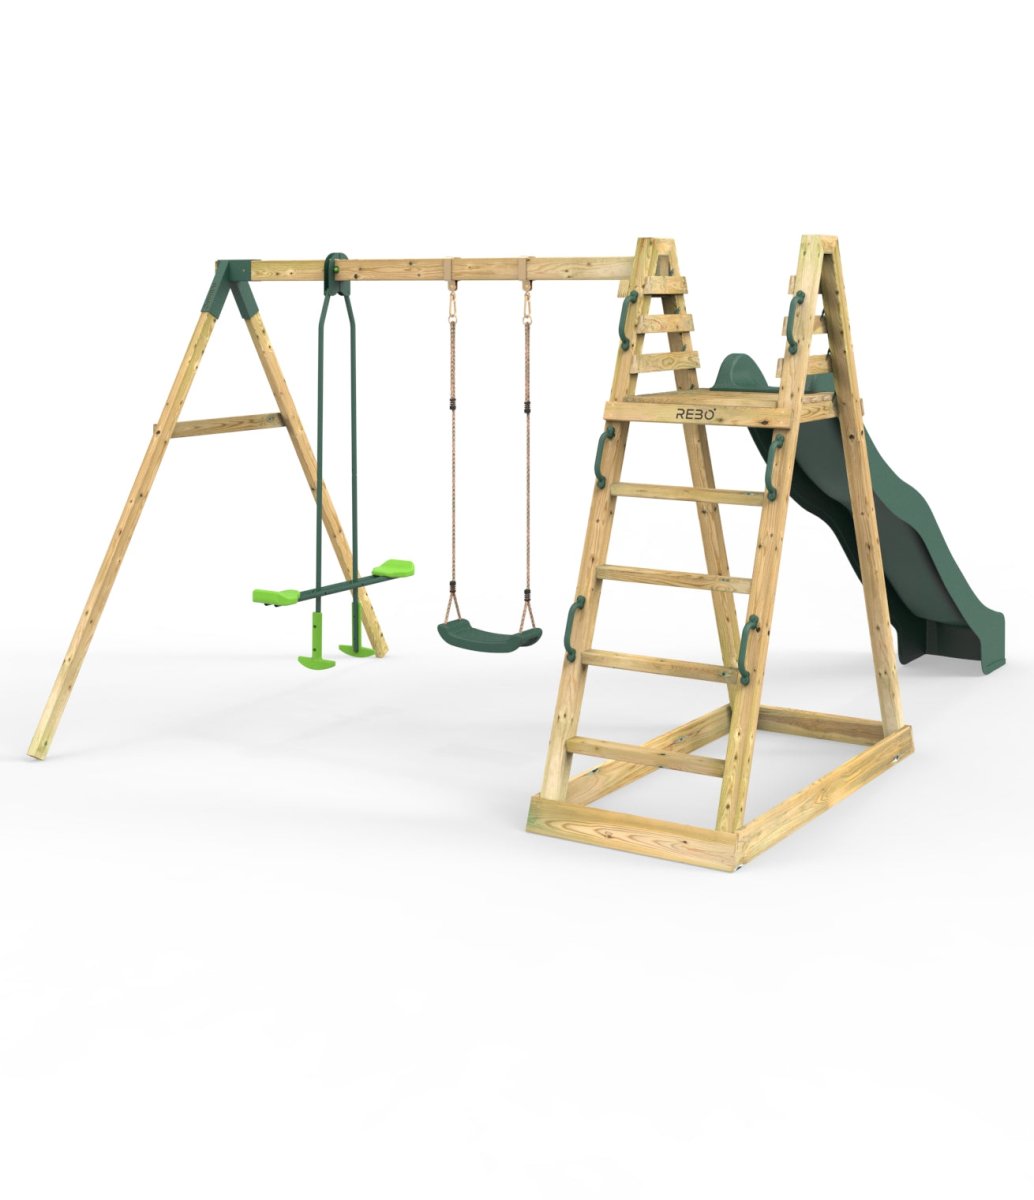 Rebo Wooden Pyramid Activity Frame with Swings & 10ft Water Slide - Feather